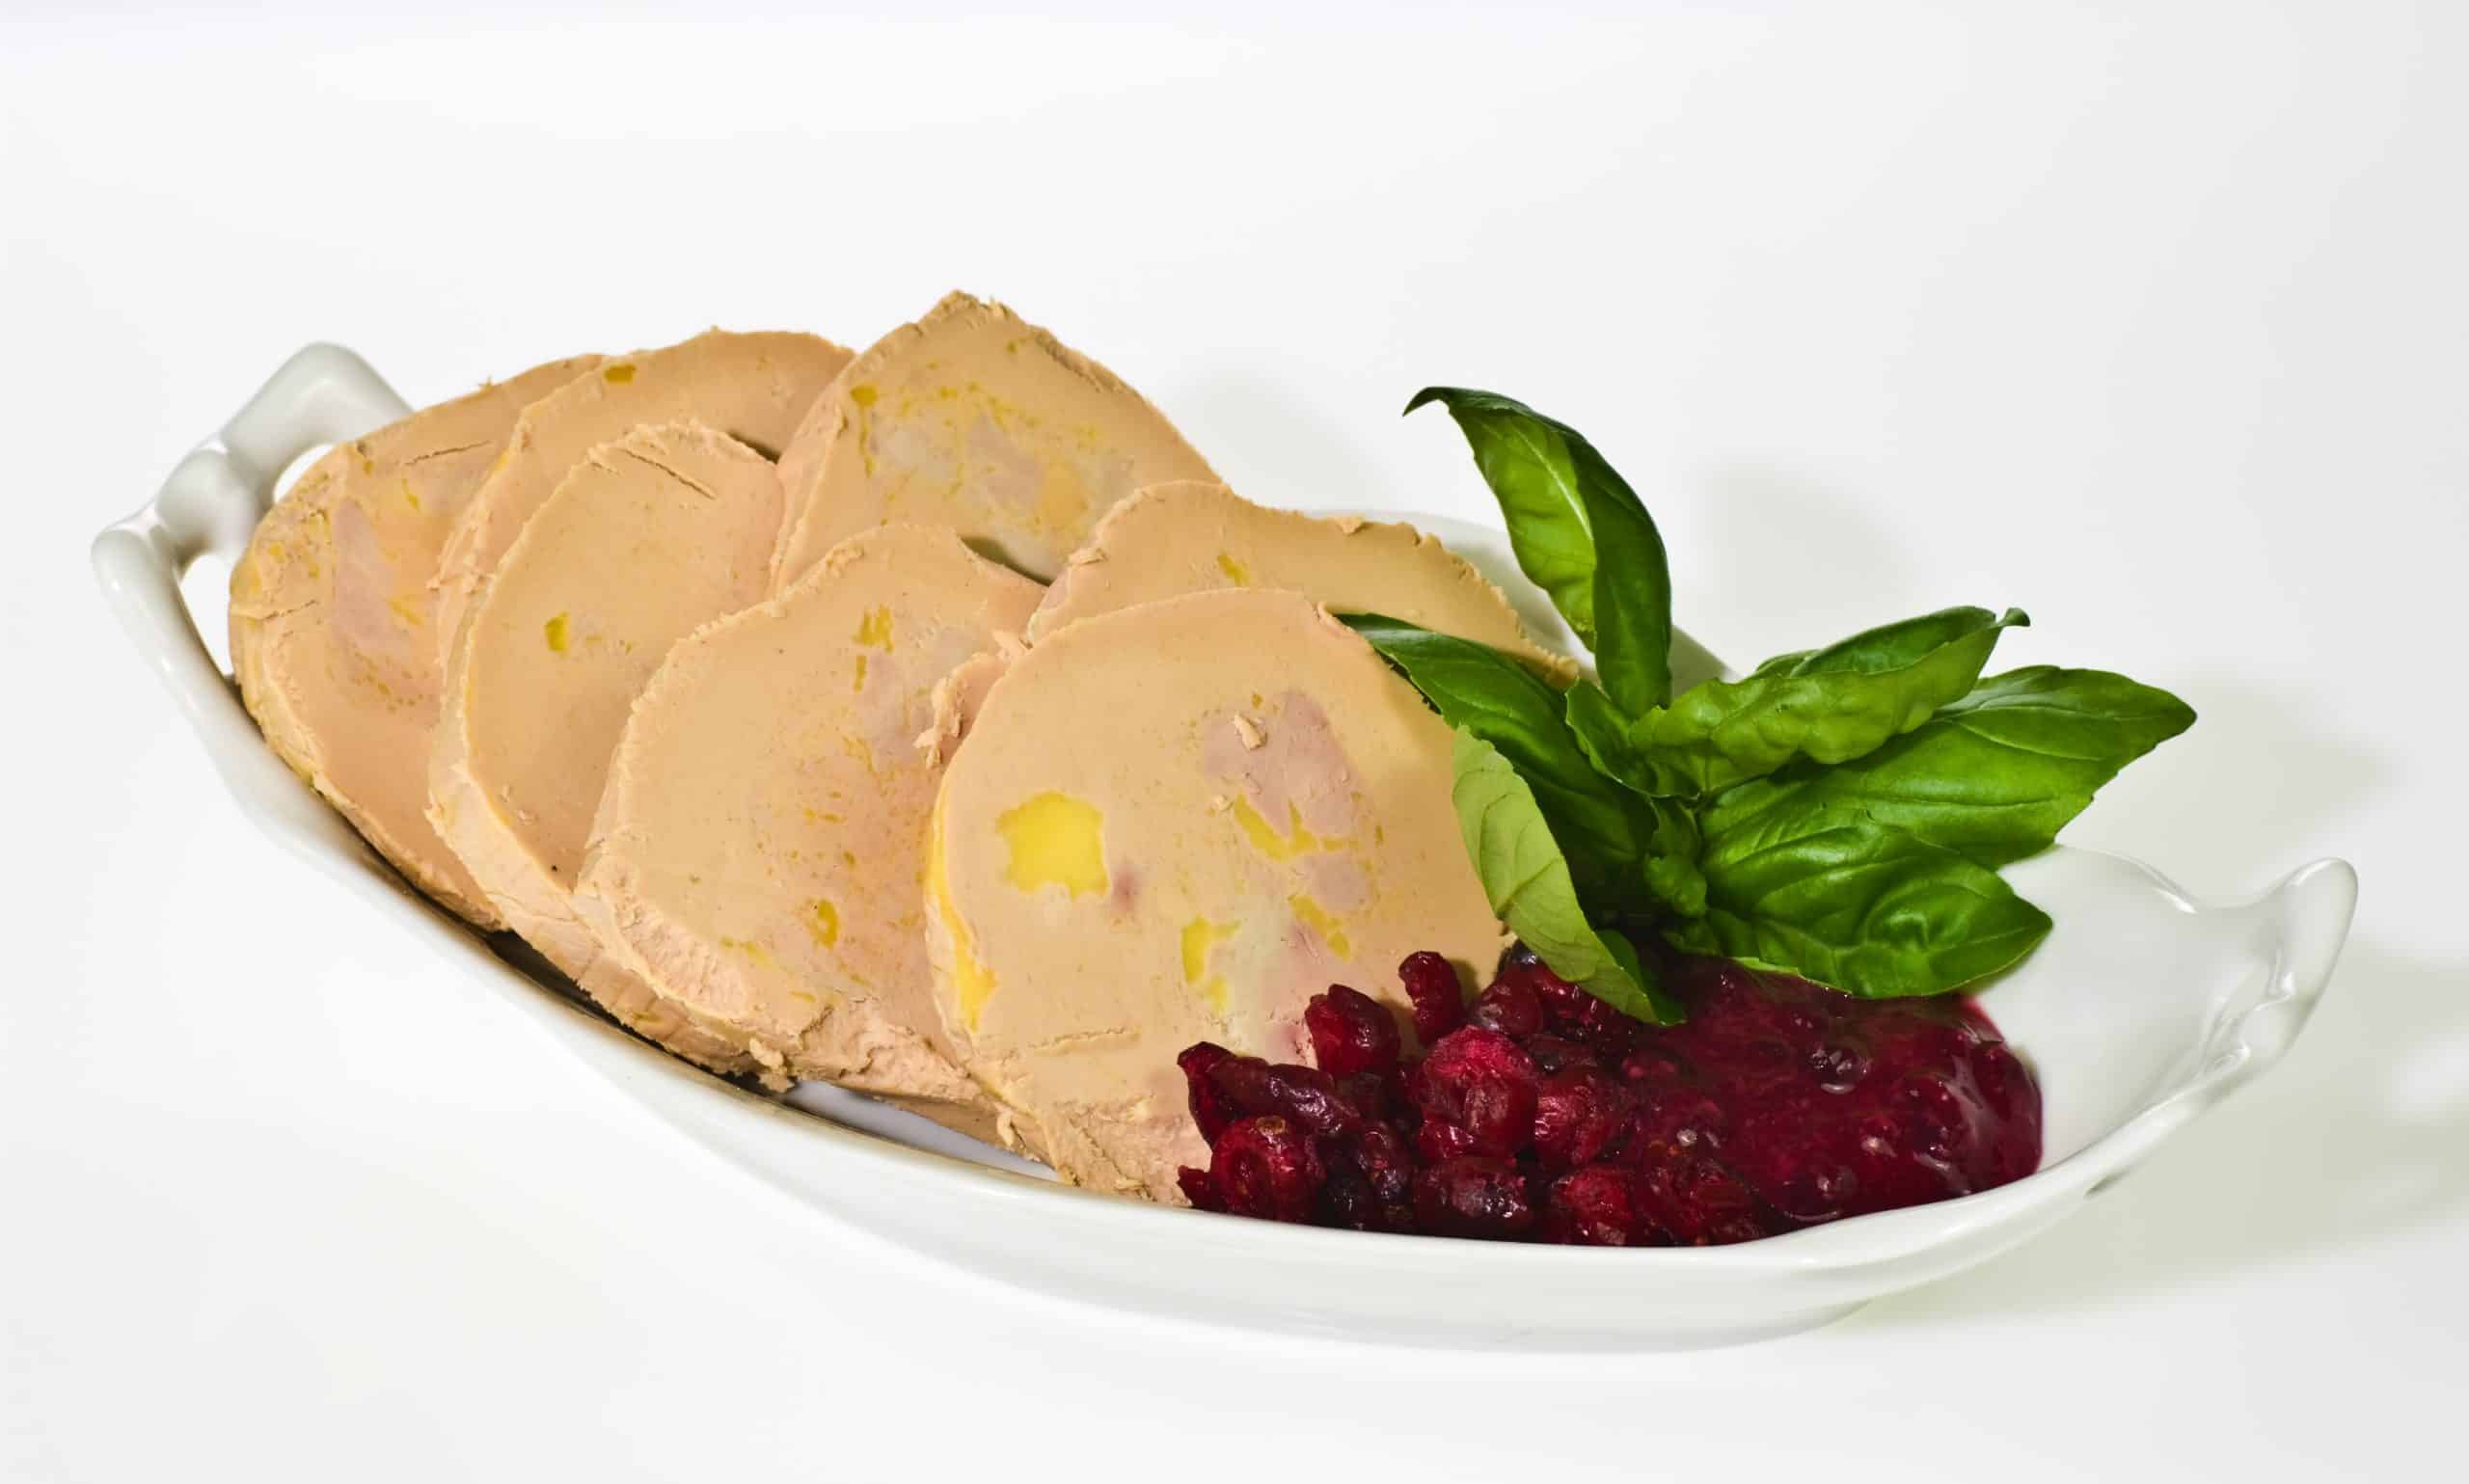 Sliced foie gras with cumberland sauce and basil leaves